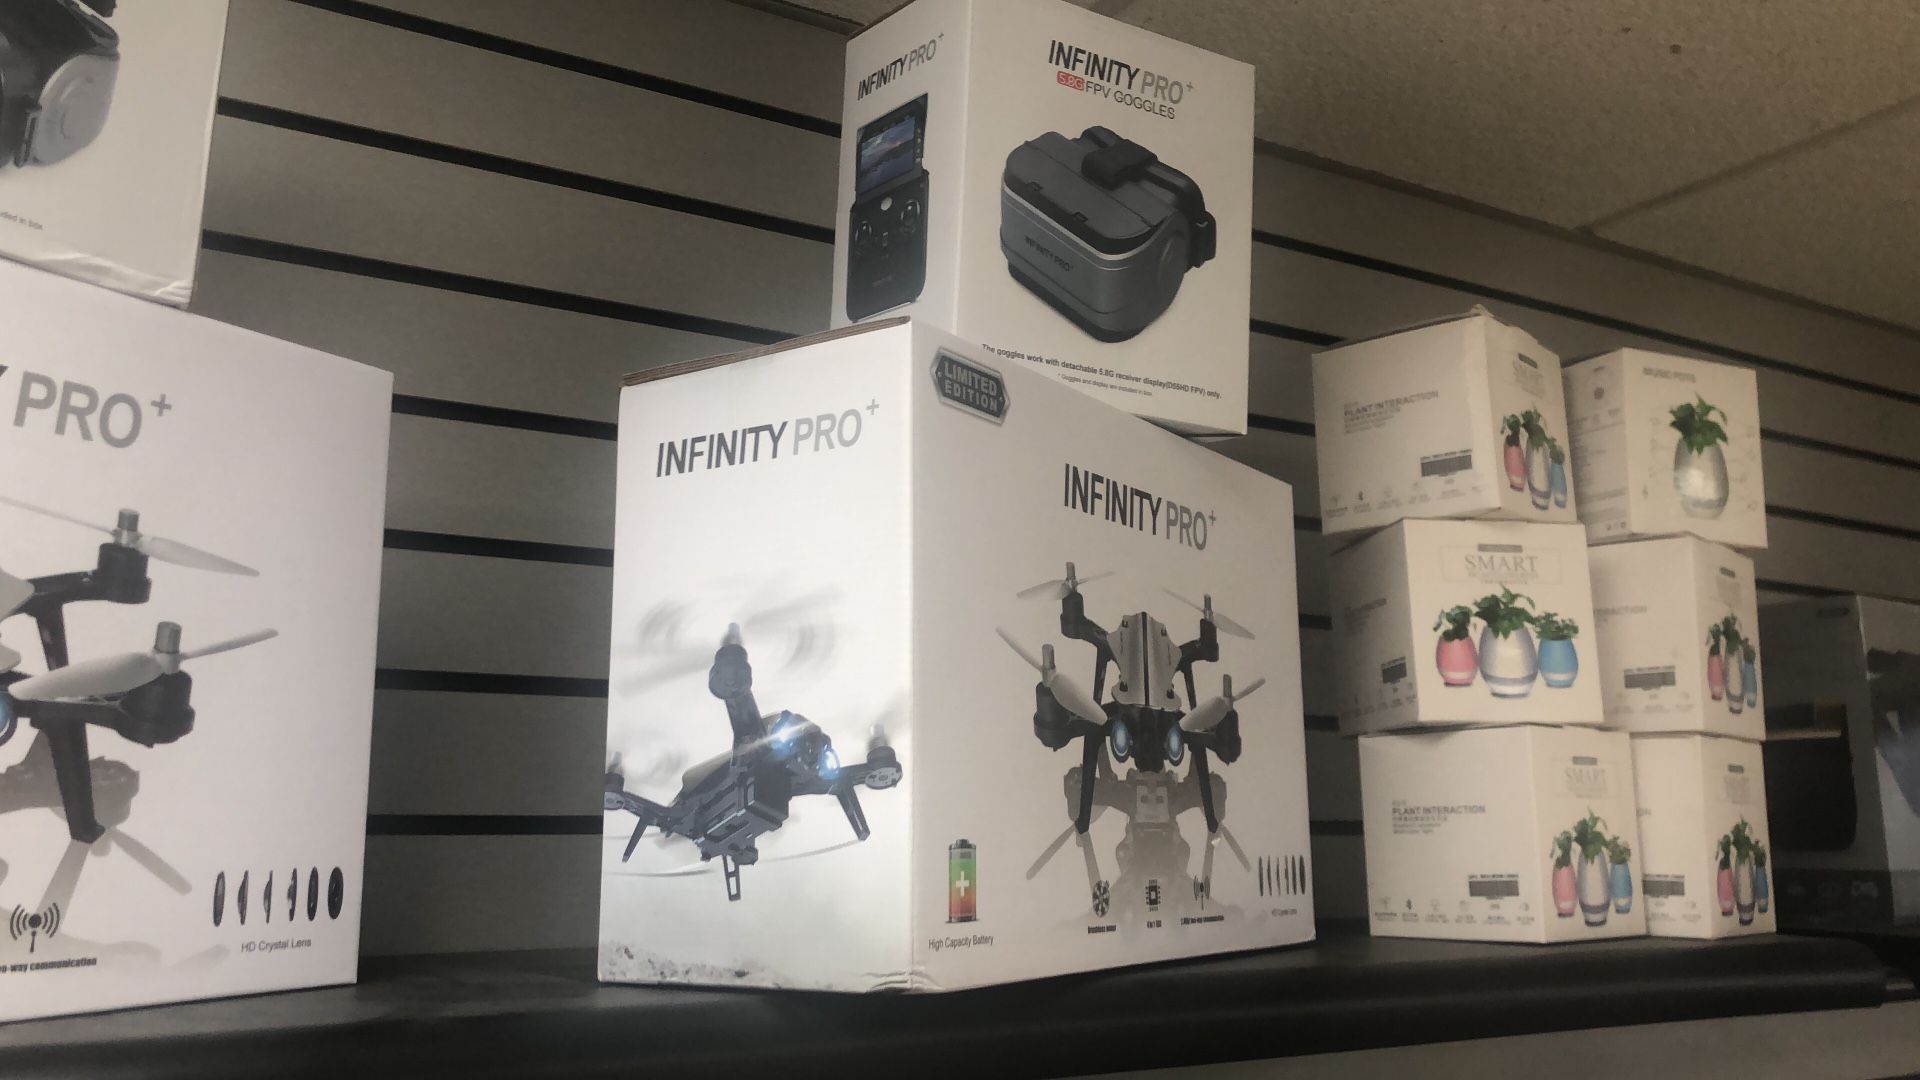 NFINITY INFINITY PRO+ DRONE BUNDLE AND FPV RC MONITOR + GOGGLES REMOTE CONTROL HD CAMERA LIMITED EDITION